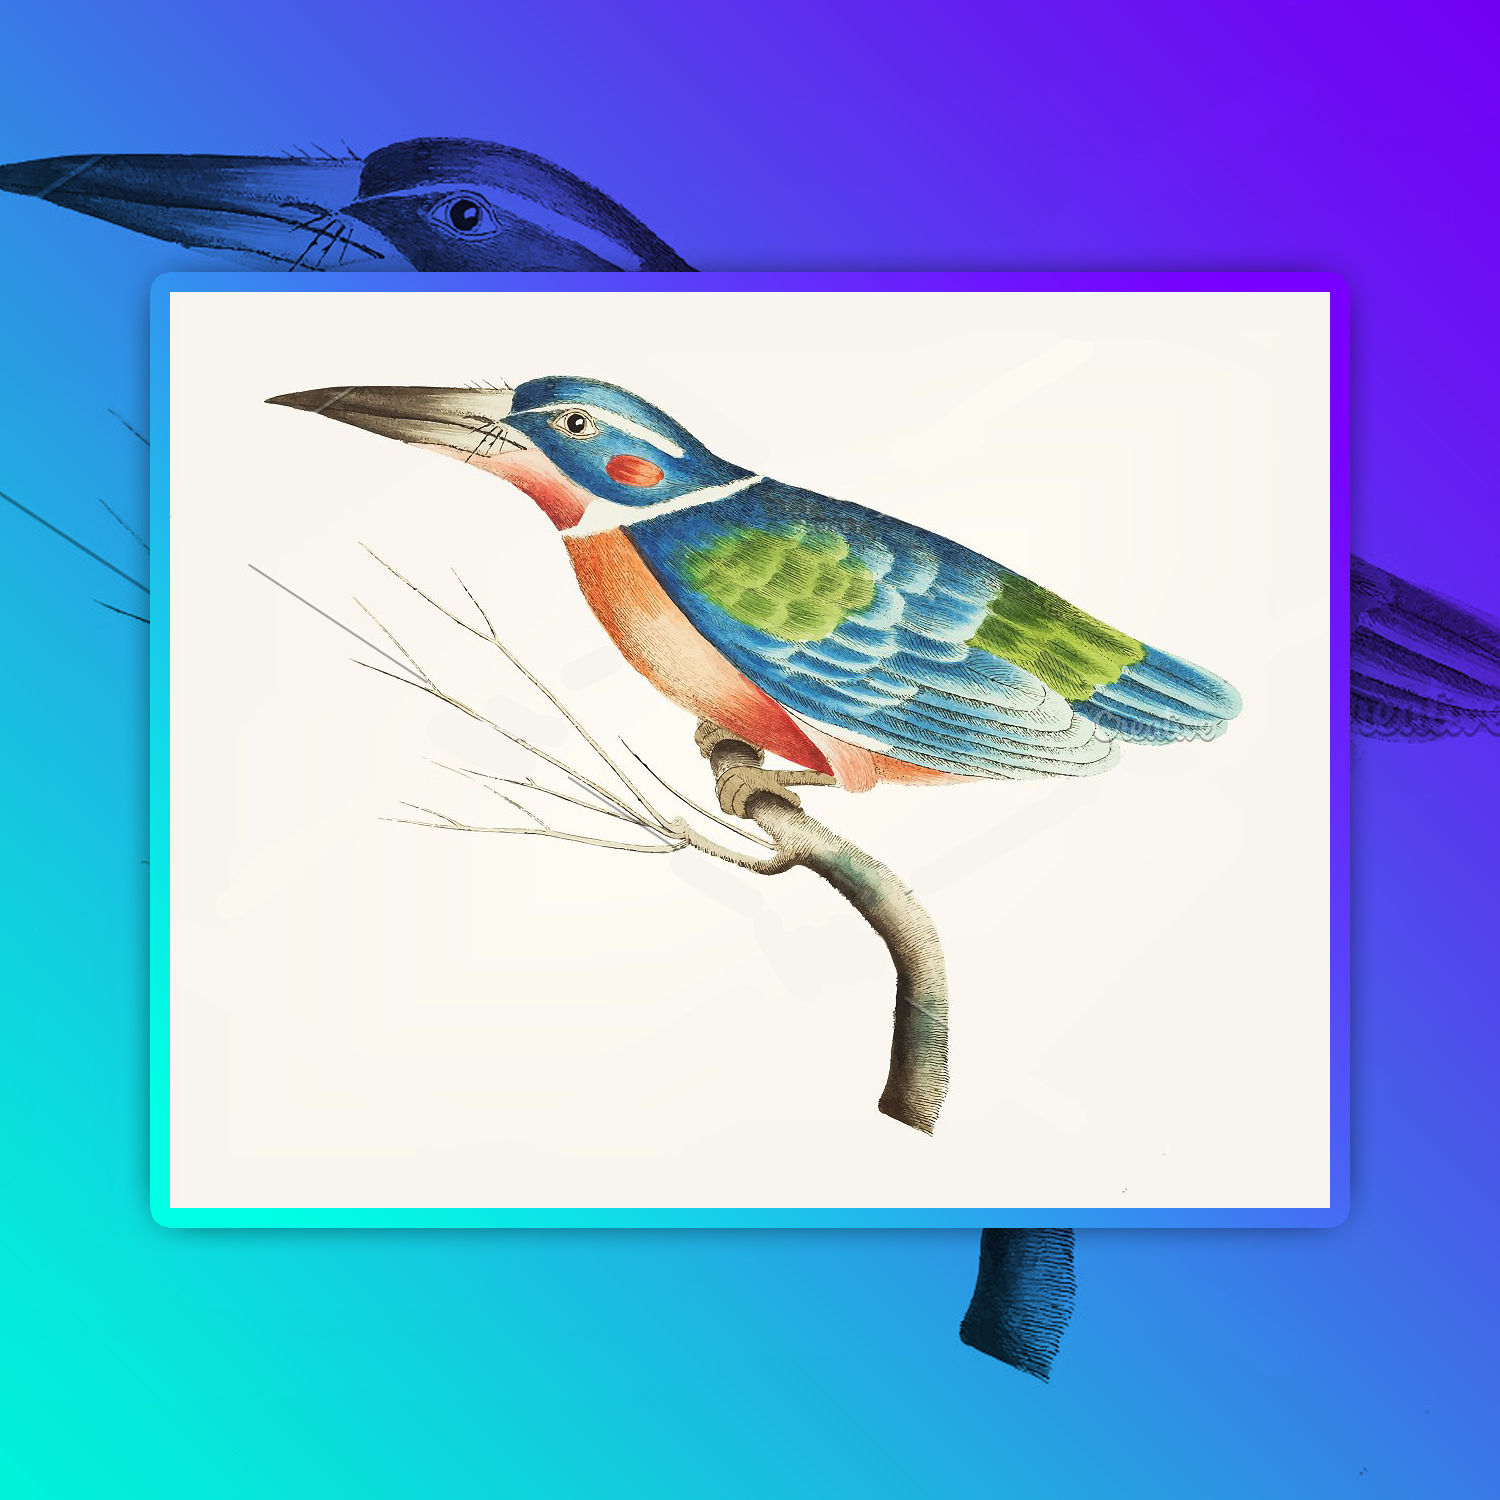 Preview illustration of blue kingfisher.